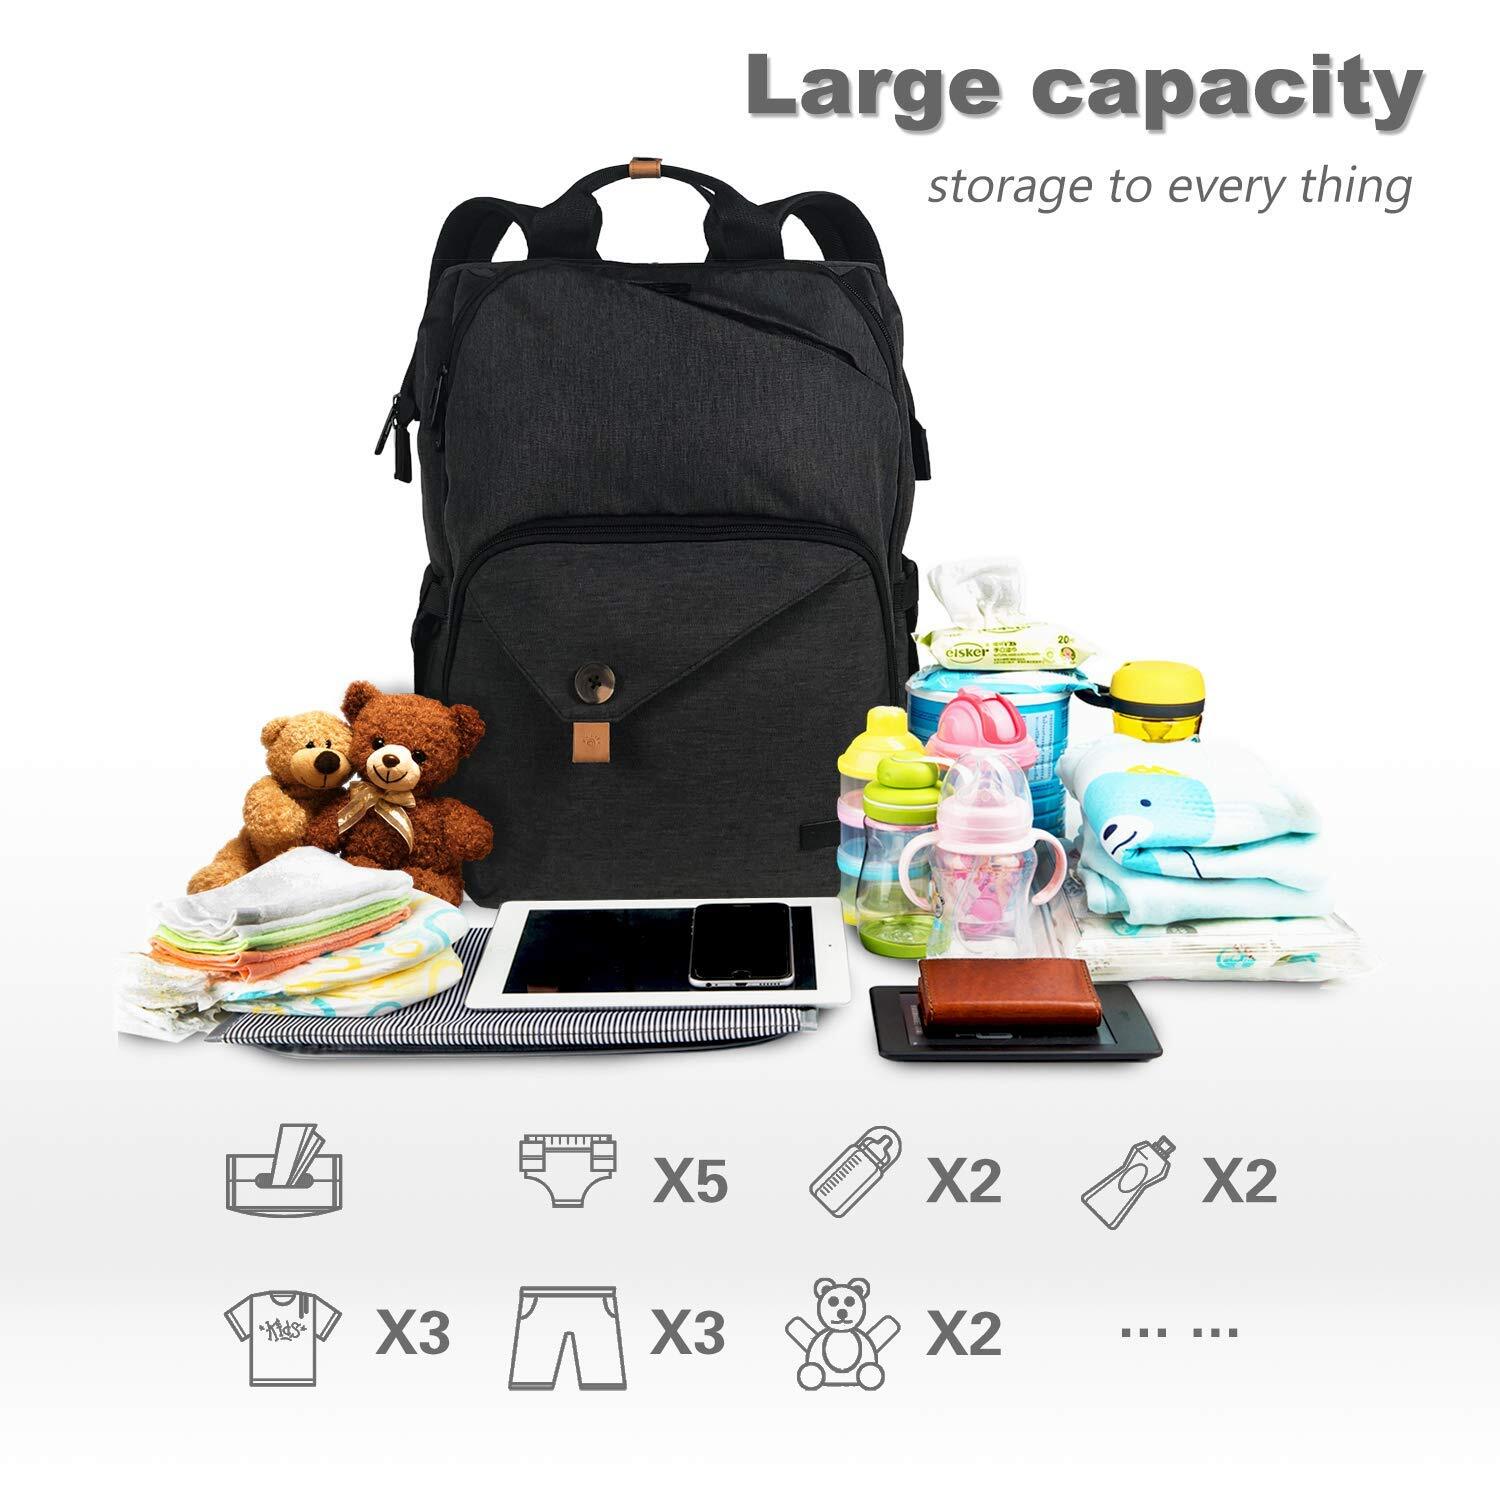 https://images.51microshop.com/1658/product/20181129/Hap_Tim_Baby_Diaper_Bag_Backpack_W_Stroller_Straps_Waterproof_Nappy_Bag_Backpack_for_Newborn_Mother_Father_US7340_DG__1543454275255_0.jpg